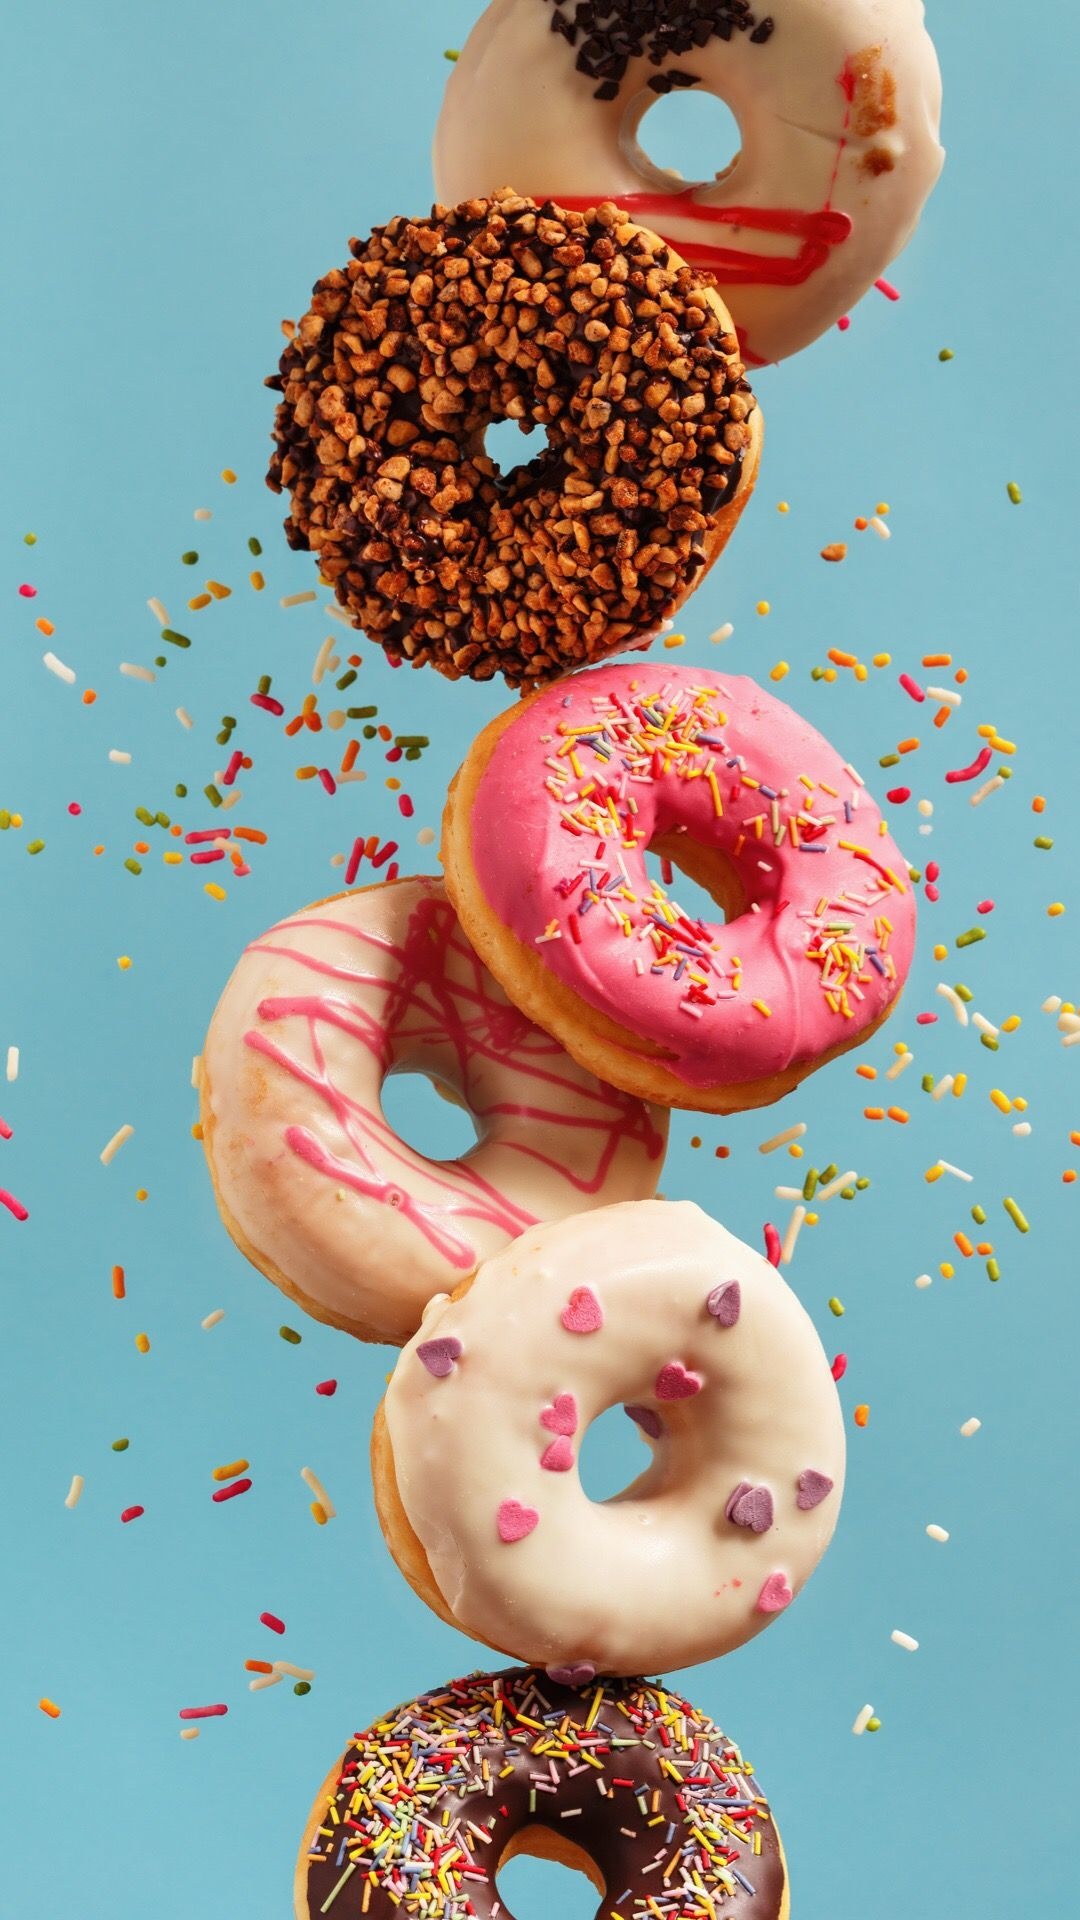 Donut: Known for their porous structures and melt-in-your-mouth consistencies. 1080x1920 Full HD Wallpaper.